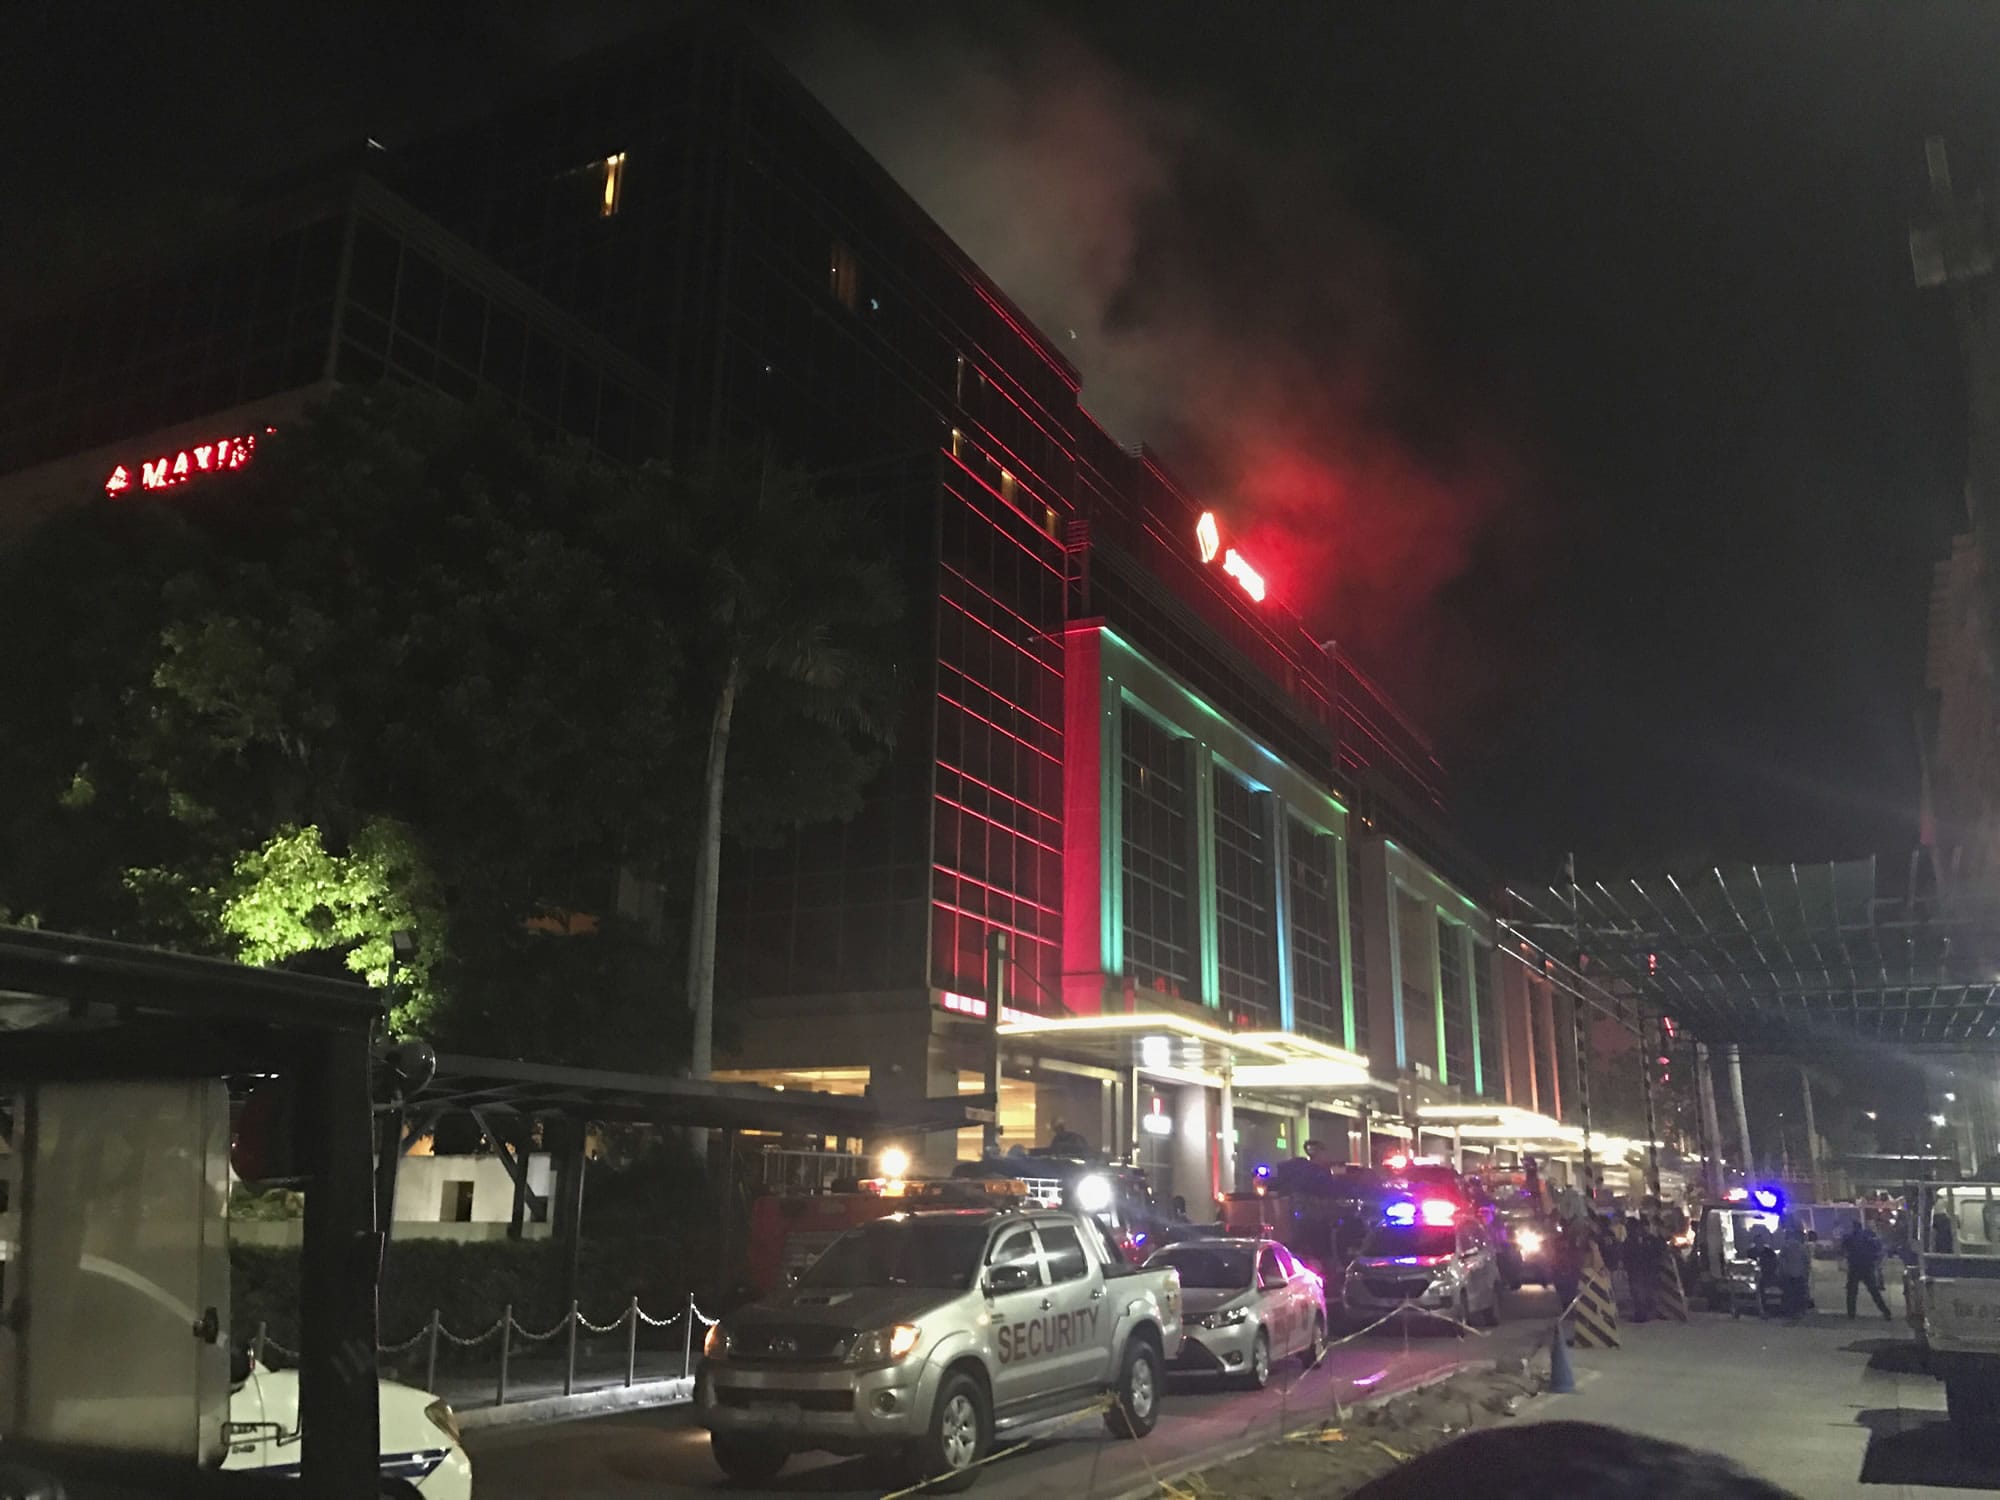 Emergency responders and security officials are parked outside as smoke rises from the Resorts World Manila complex, early Friday, June 2, 2017, in Manila, Philippines. Gunshots and explosions rang out early Friday at a mall, casino and hotel complex near Manila's international airport in the Philippine capital, sparking a security alarm amid an ongoing Muslim militant siege in the country's south.